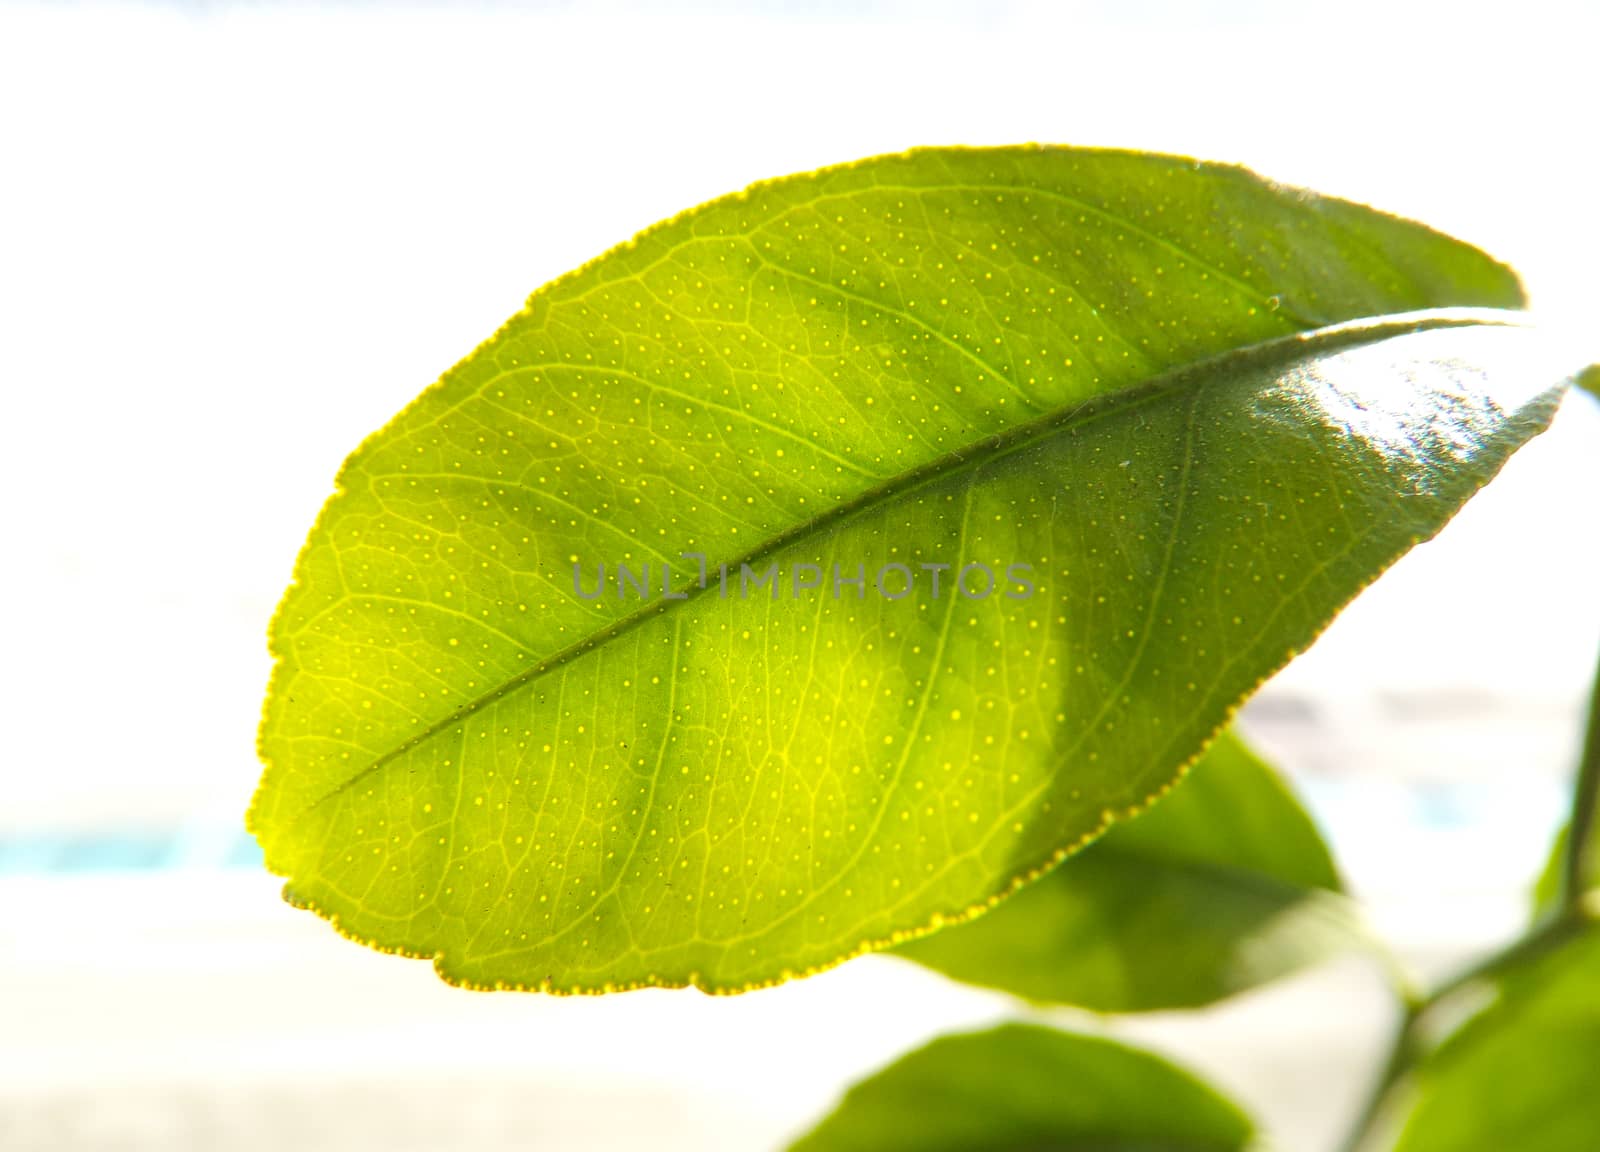 Bright young leaf of a tree sapling on a white background. Agriculture and cultivation of tree seedlings. Plant leaf close-up macro. Nature in close-up photography.